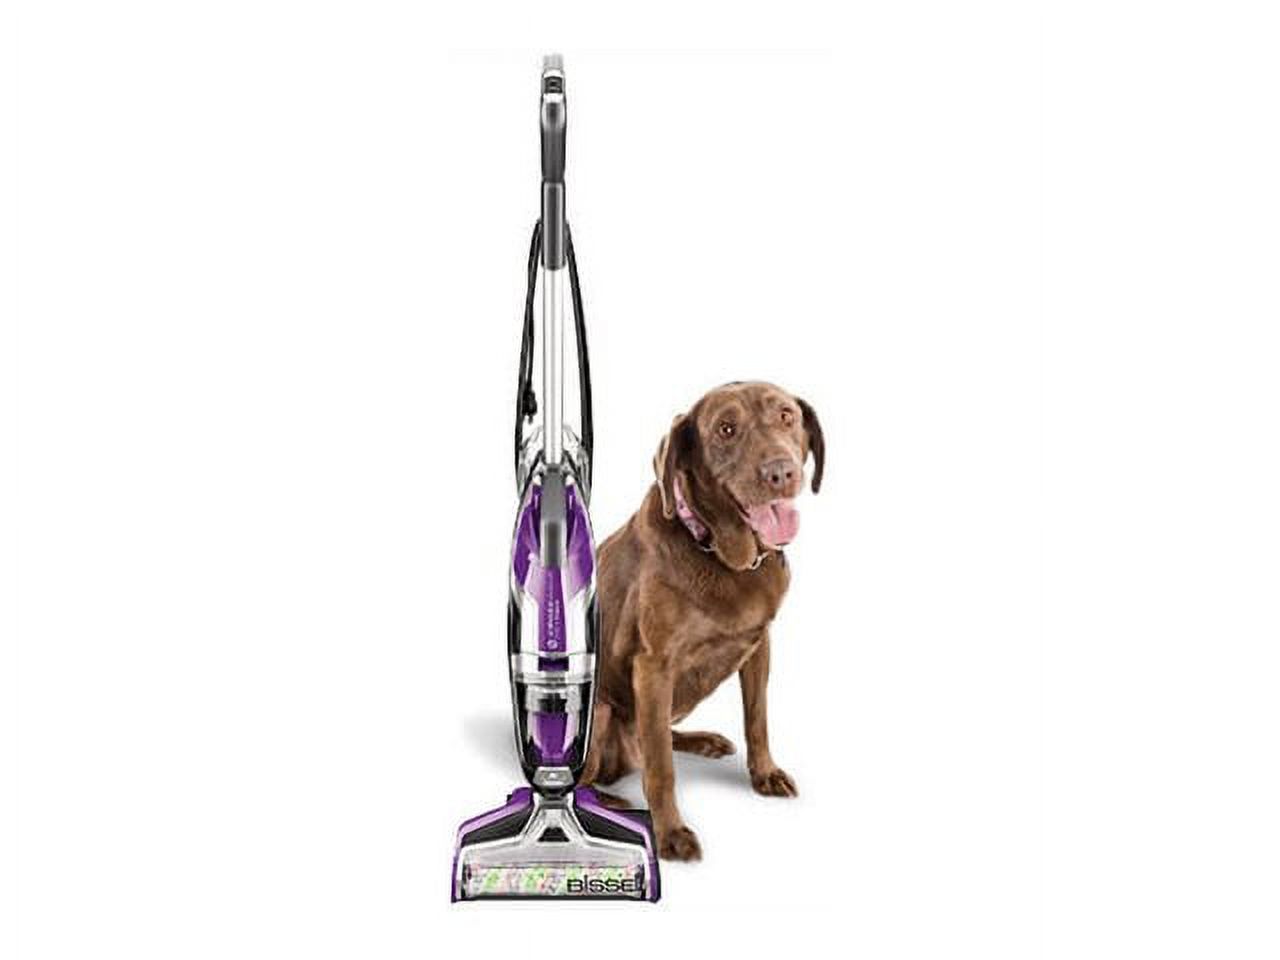 BISSELL Crosswave Pet Pro Wet Dry Vacuum, 2306A - image 2 of 6